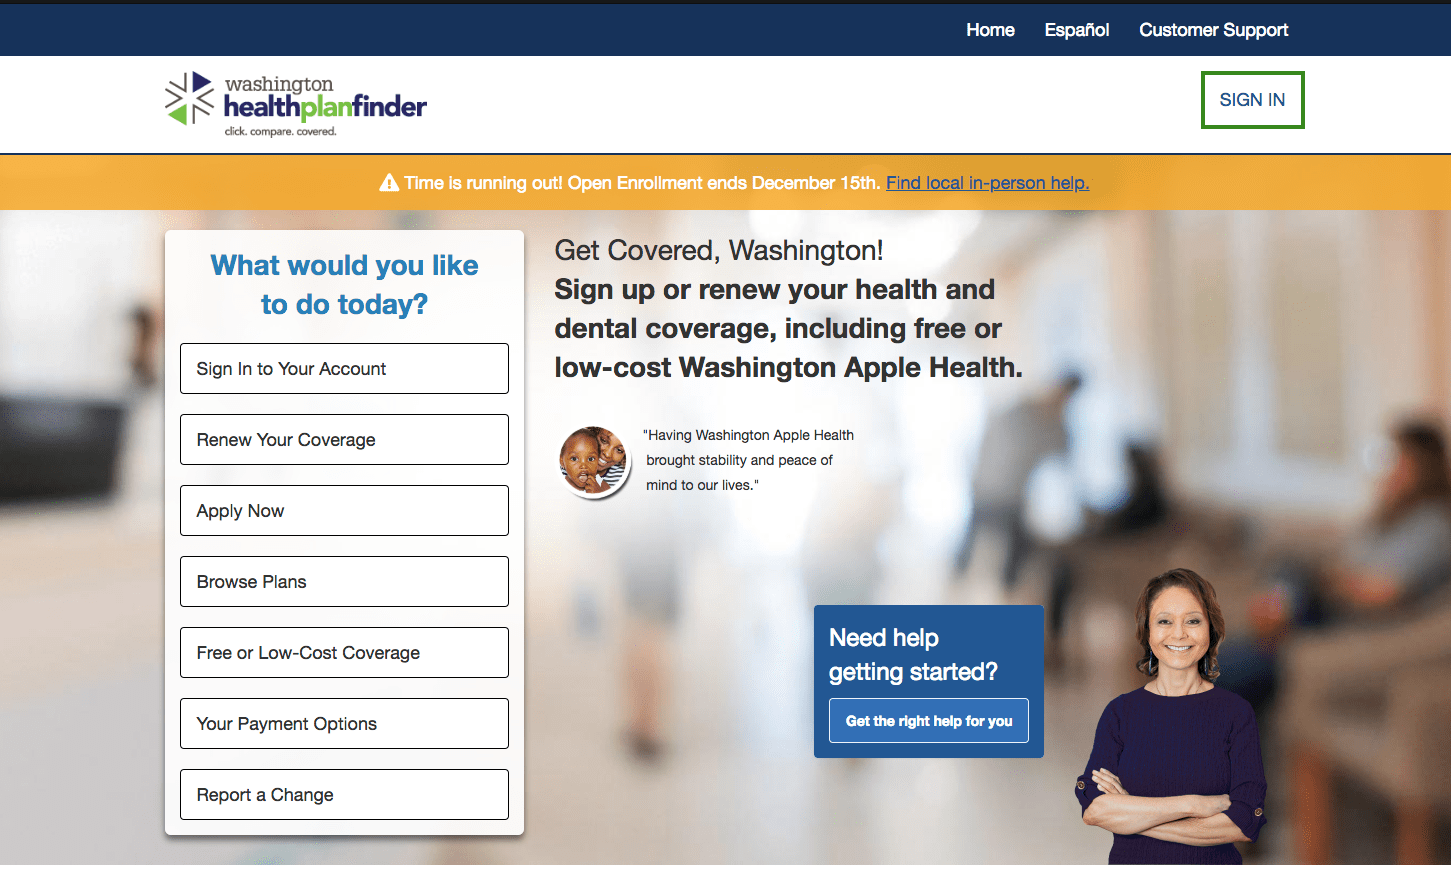 The home page of www.wahealthplanfinder.org.